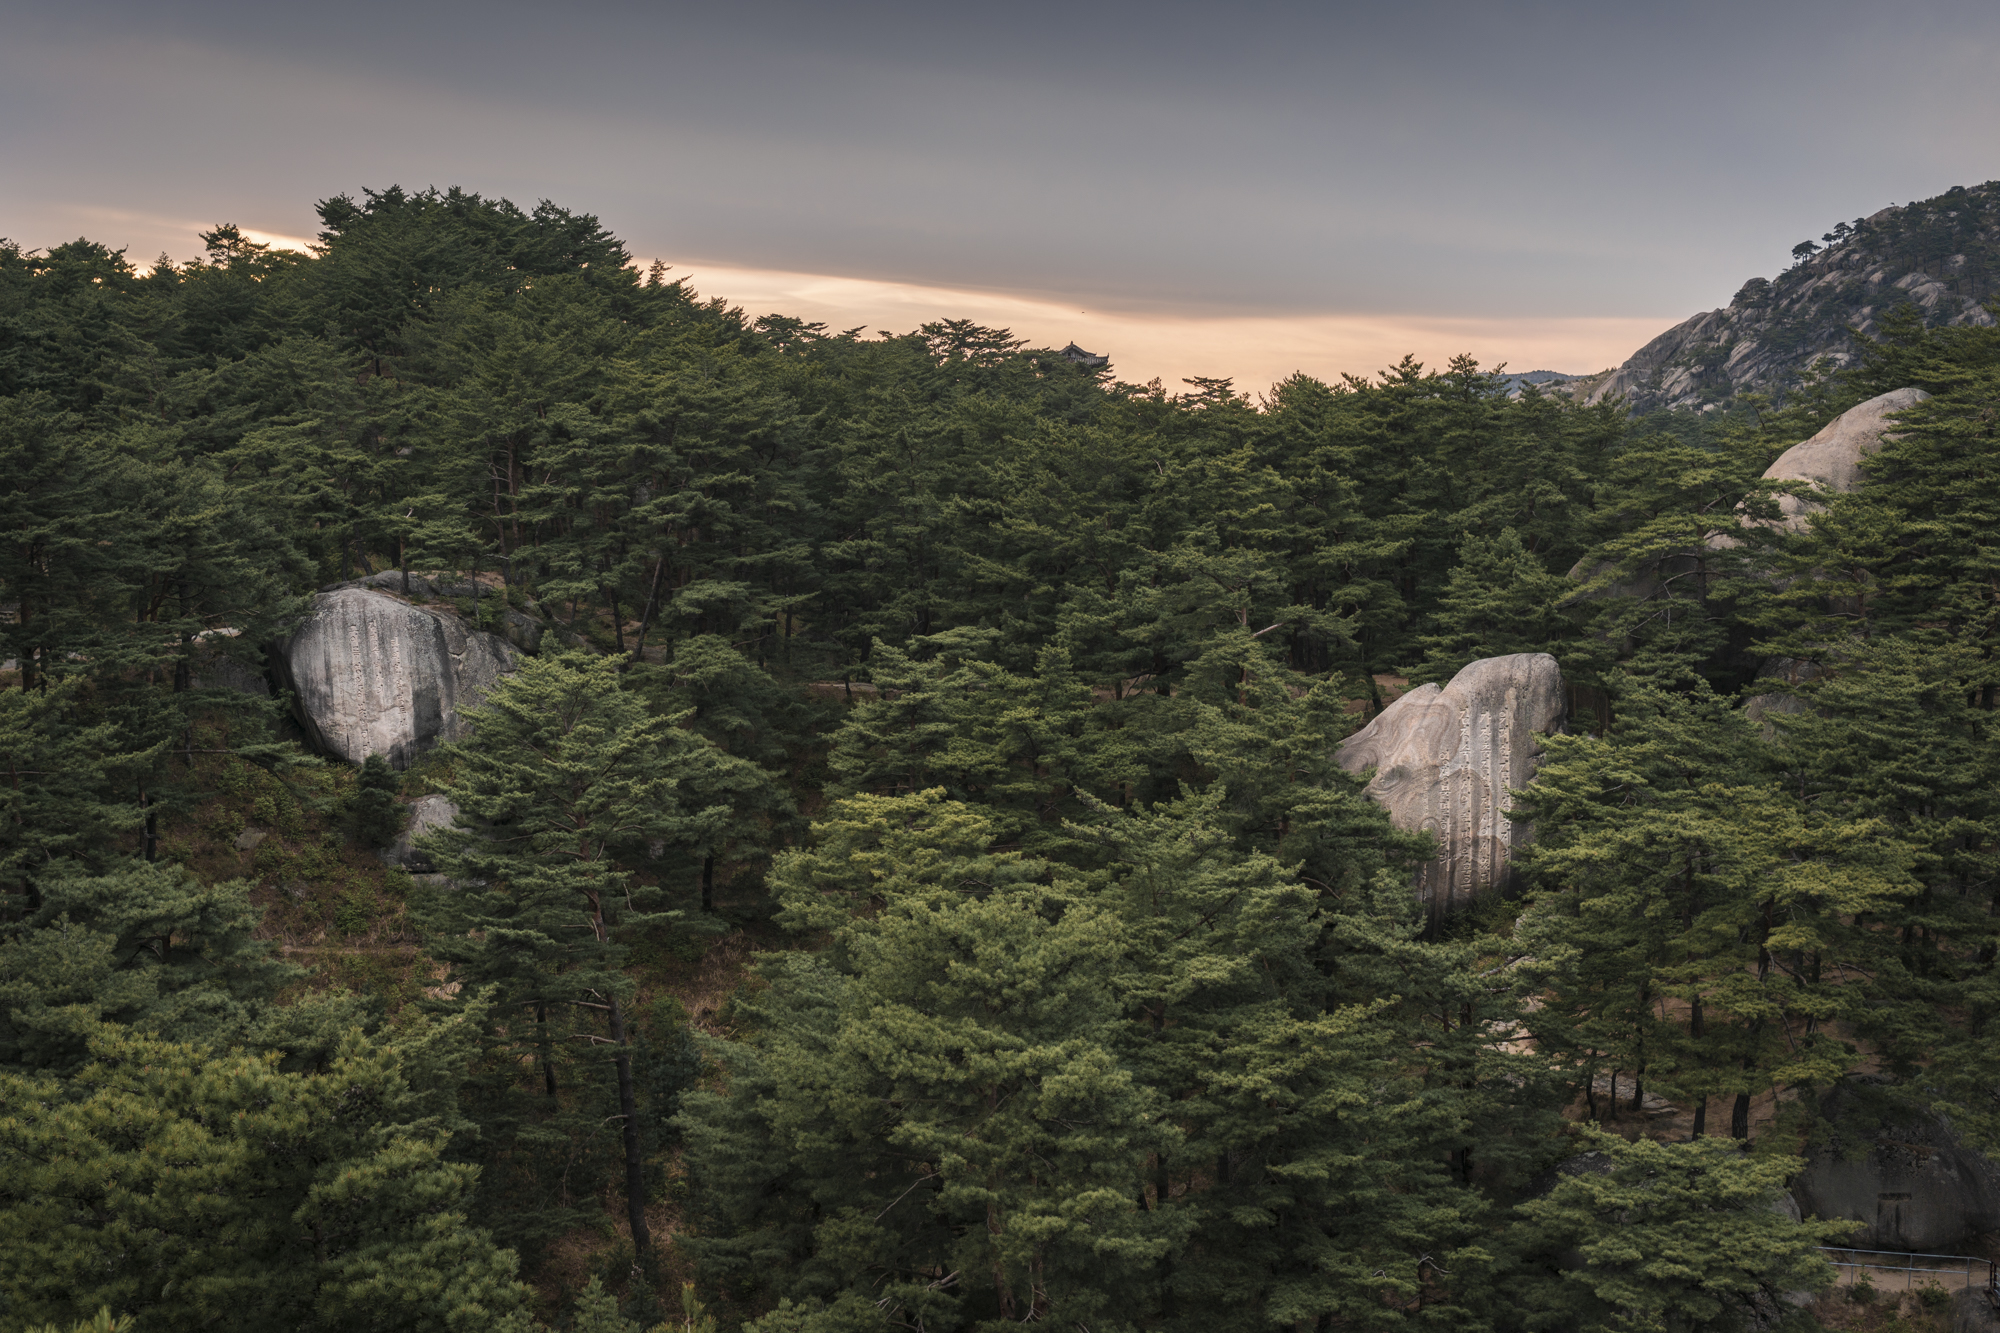  Inscriptions on the large granite rocks between red Korean pine trees in Mt. Kumgang Biosphere Reserve UNESCO site.  The reserve is located in the South-East of North Korea. 